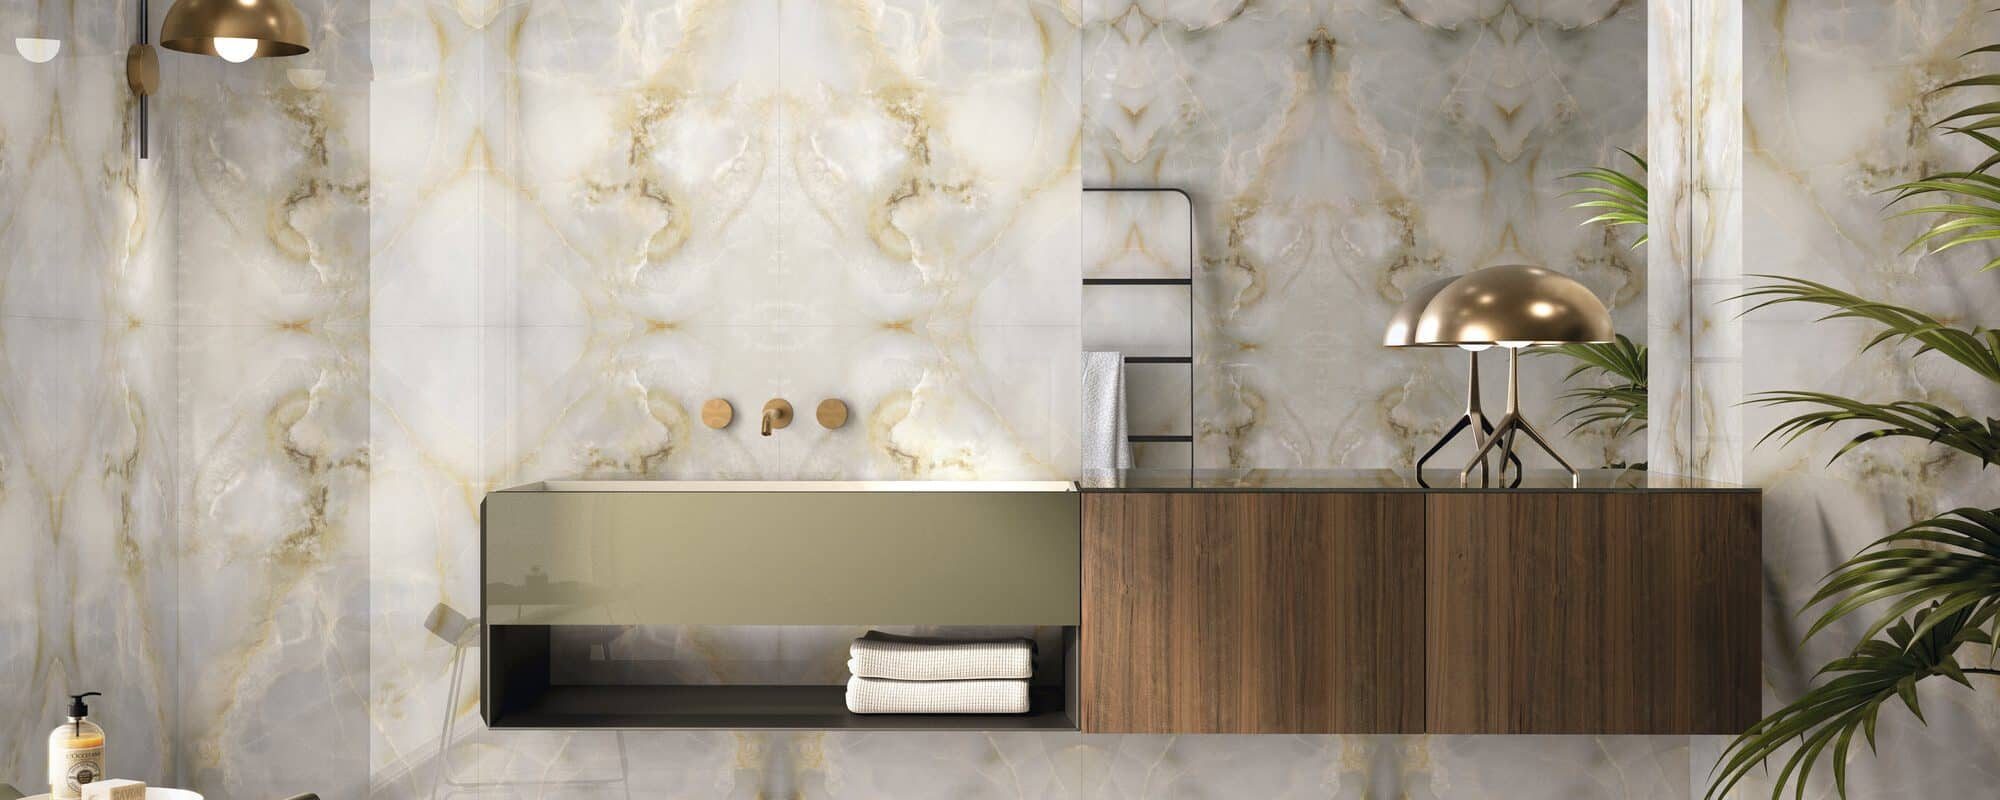 marble effect wall tiles london